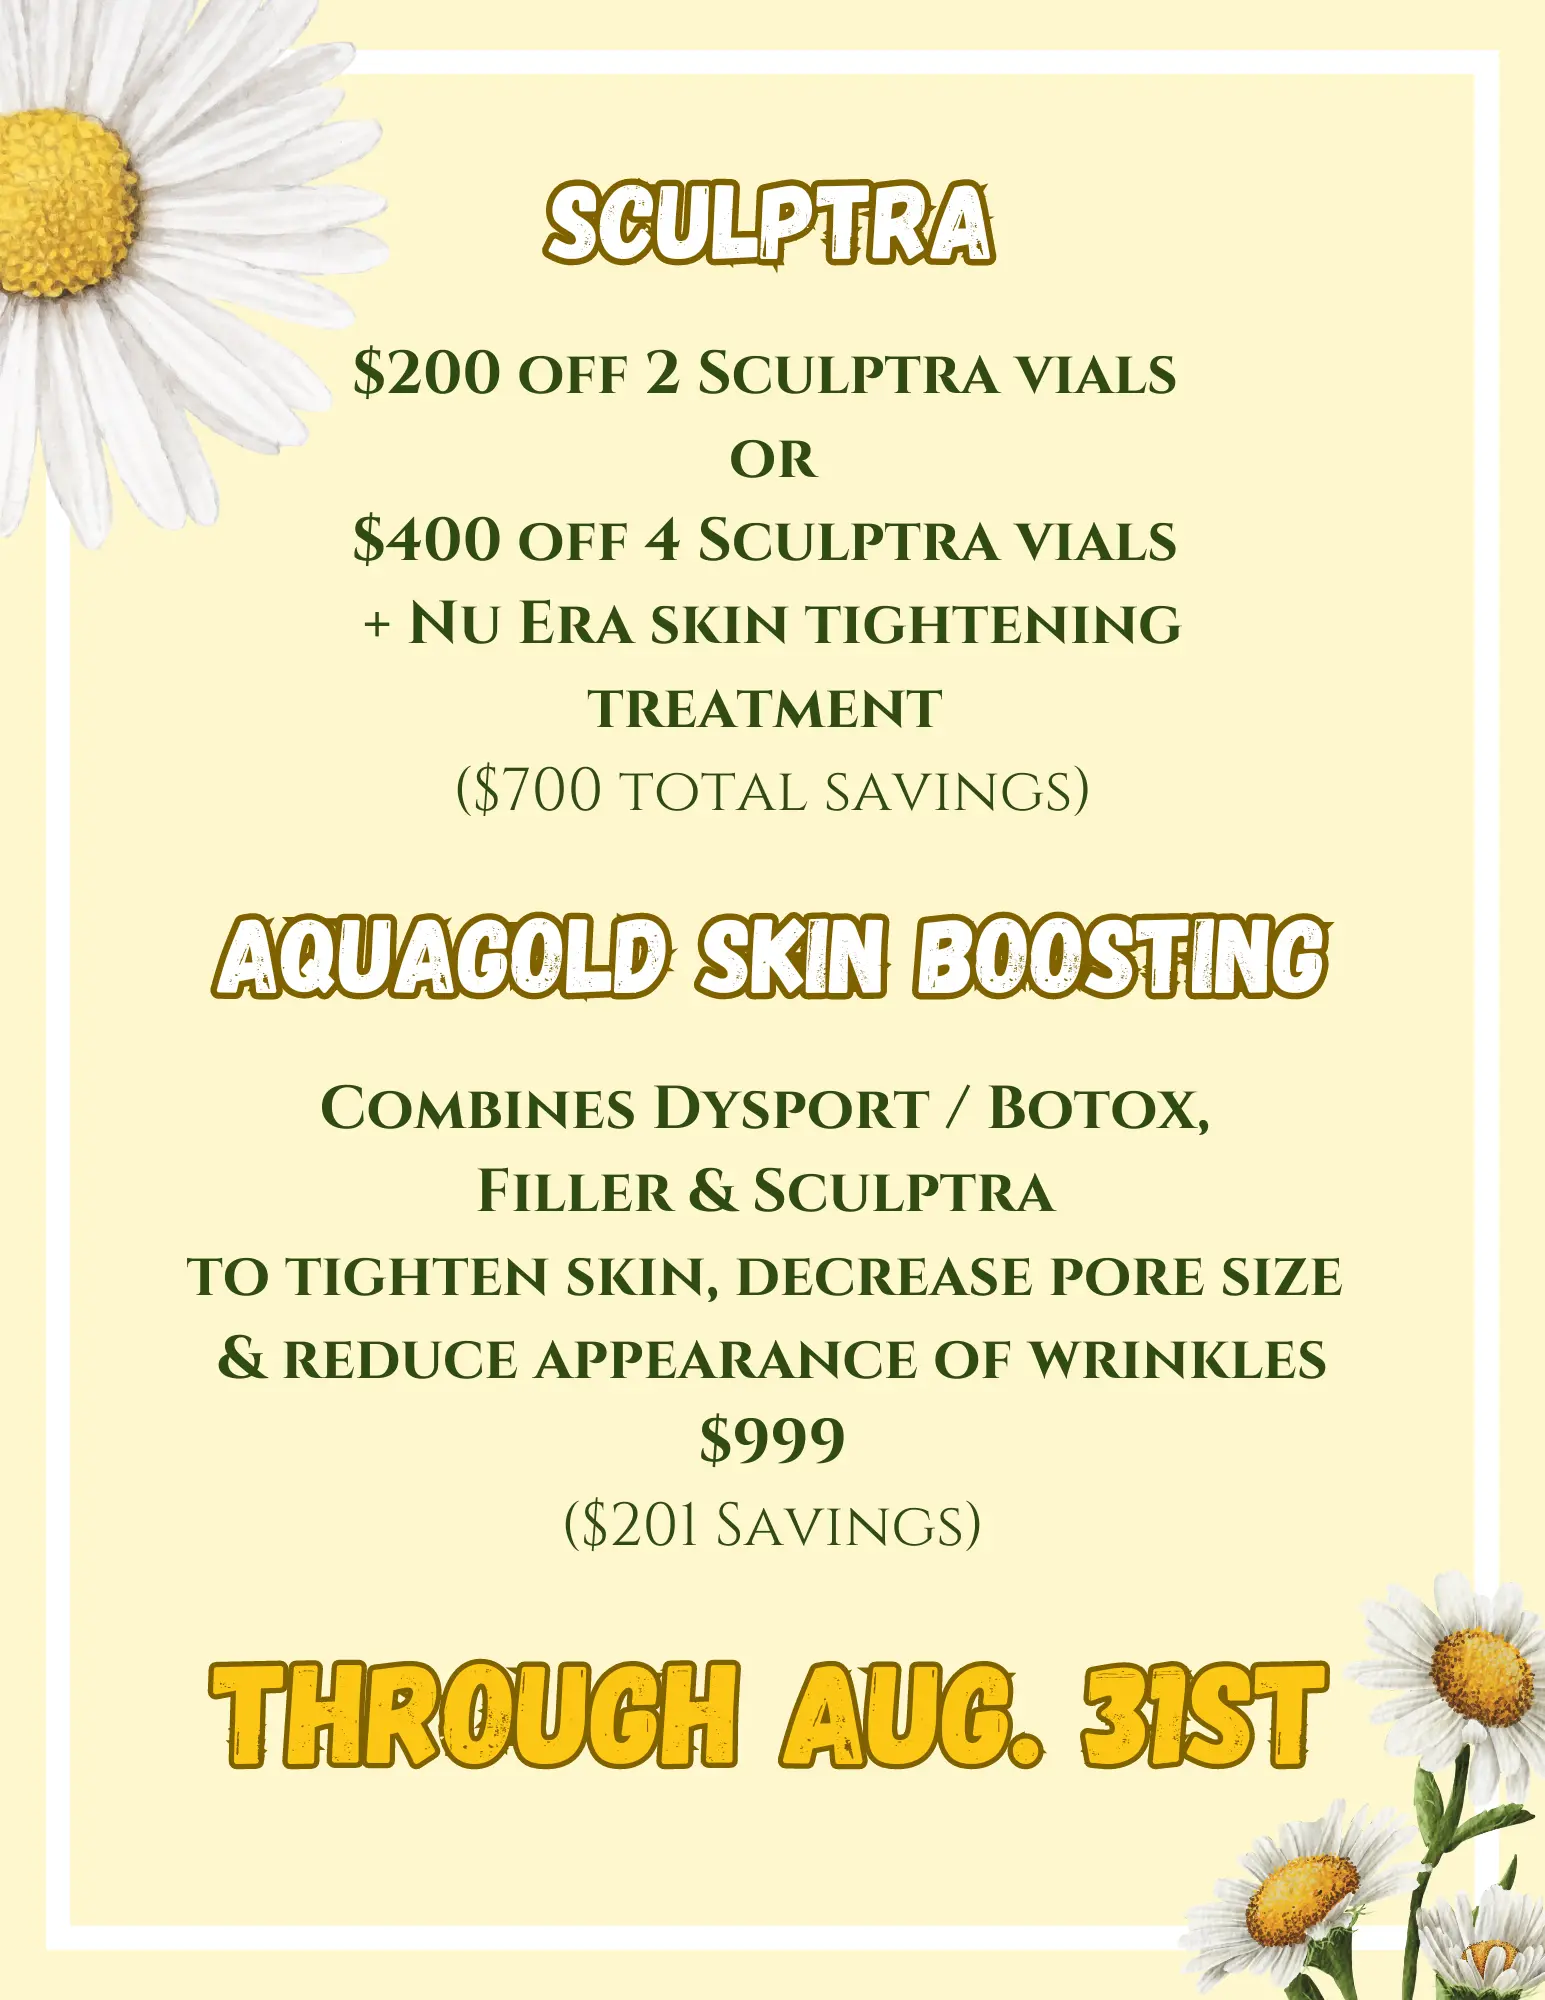 Monthly Specials,Special offers, Monthly Specials